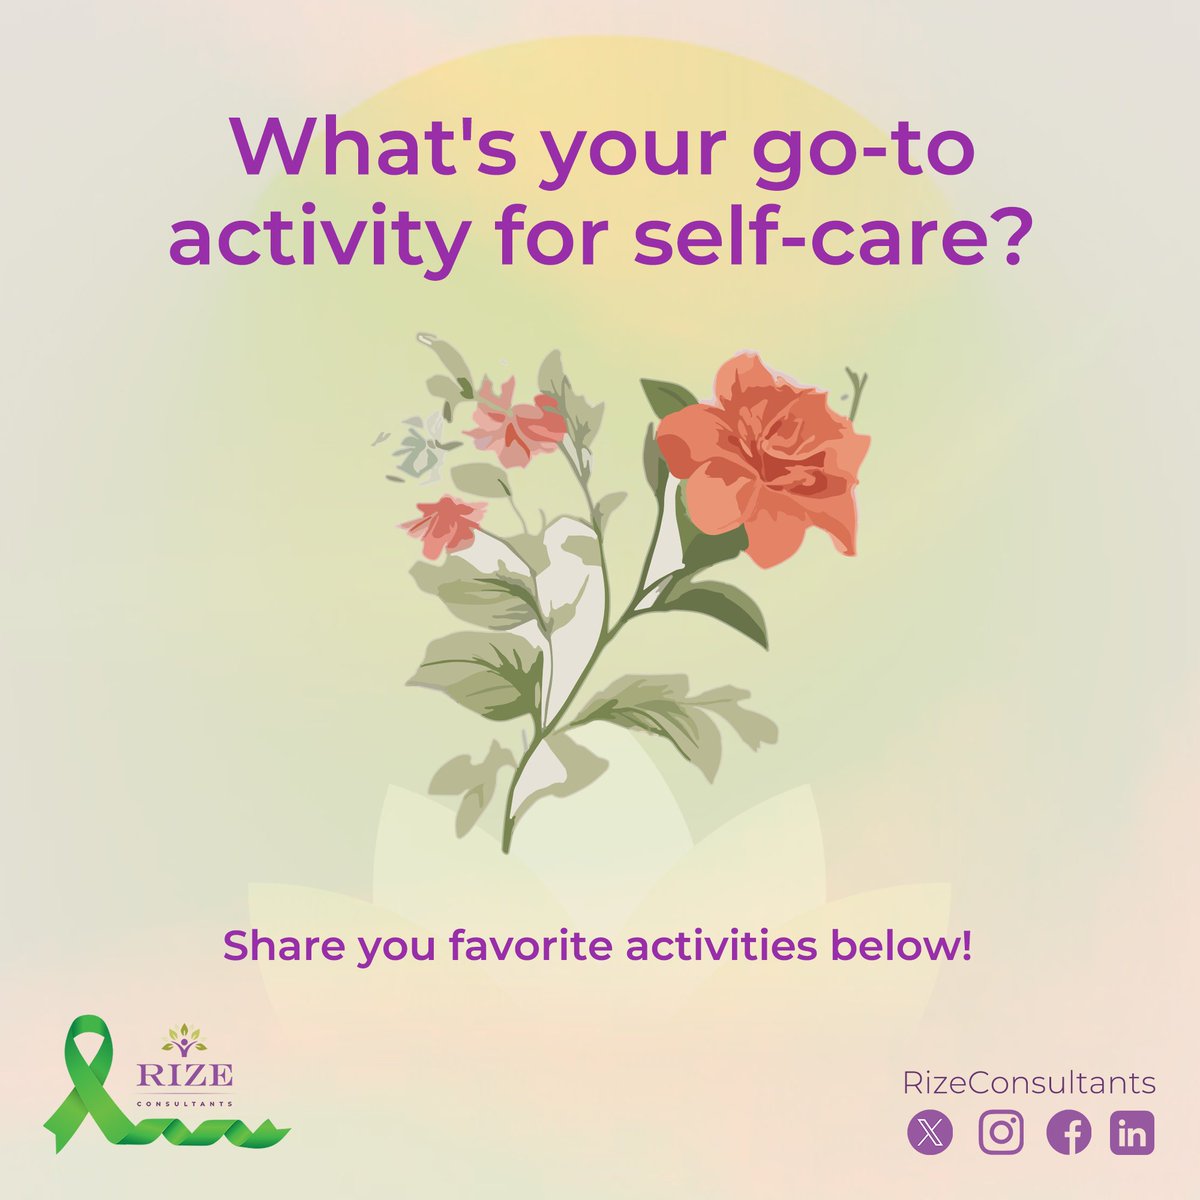 Share Your Self-Care Secret 🌸 What’s your go-to activity for recharging? Let’s celebrate our favorite me-time moments!

#RizeConsultants #Rize #SelfCareRoutine #MeTimeMoments #WellnessJourney